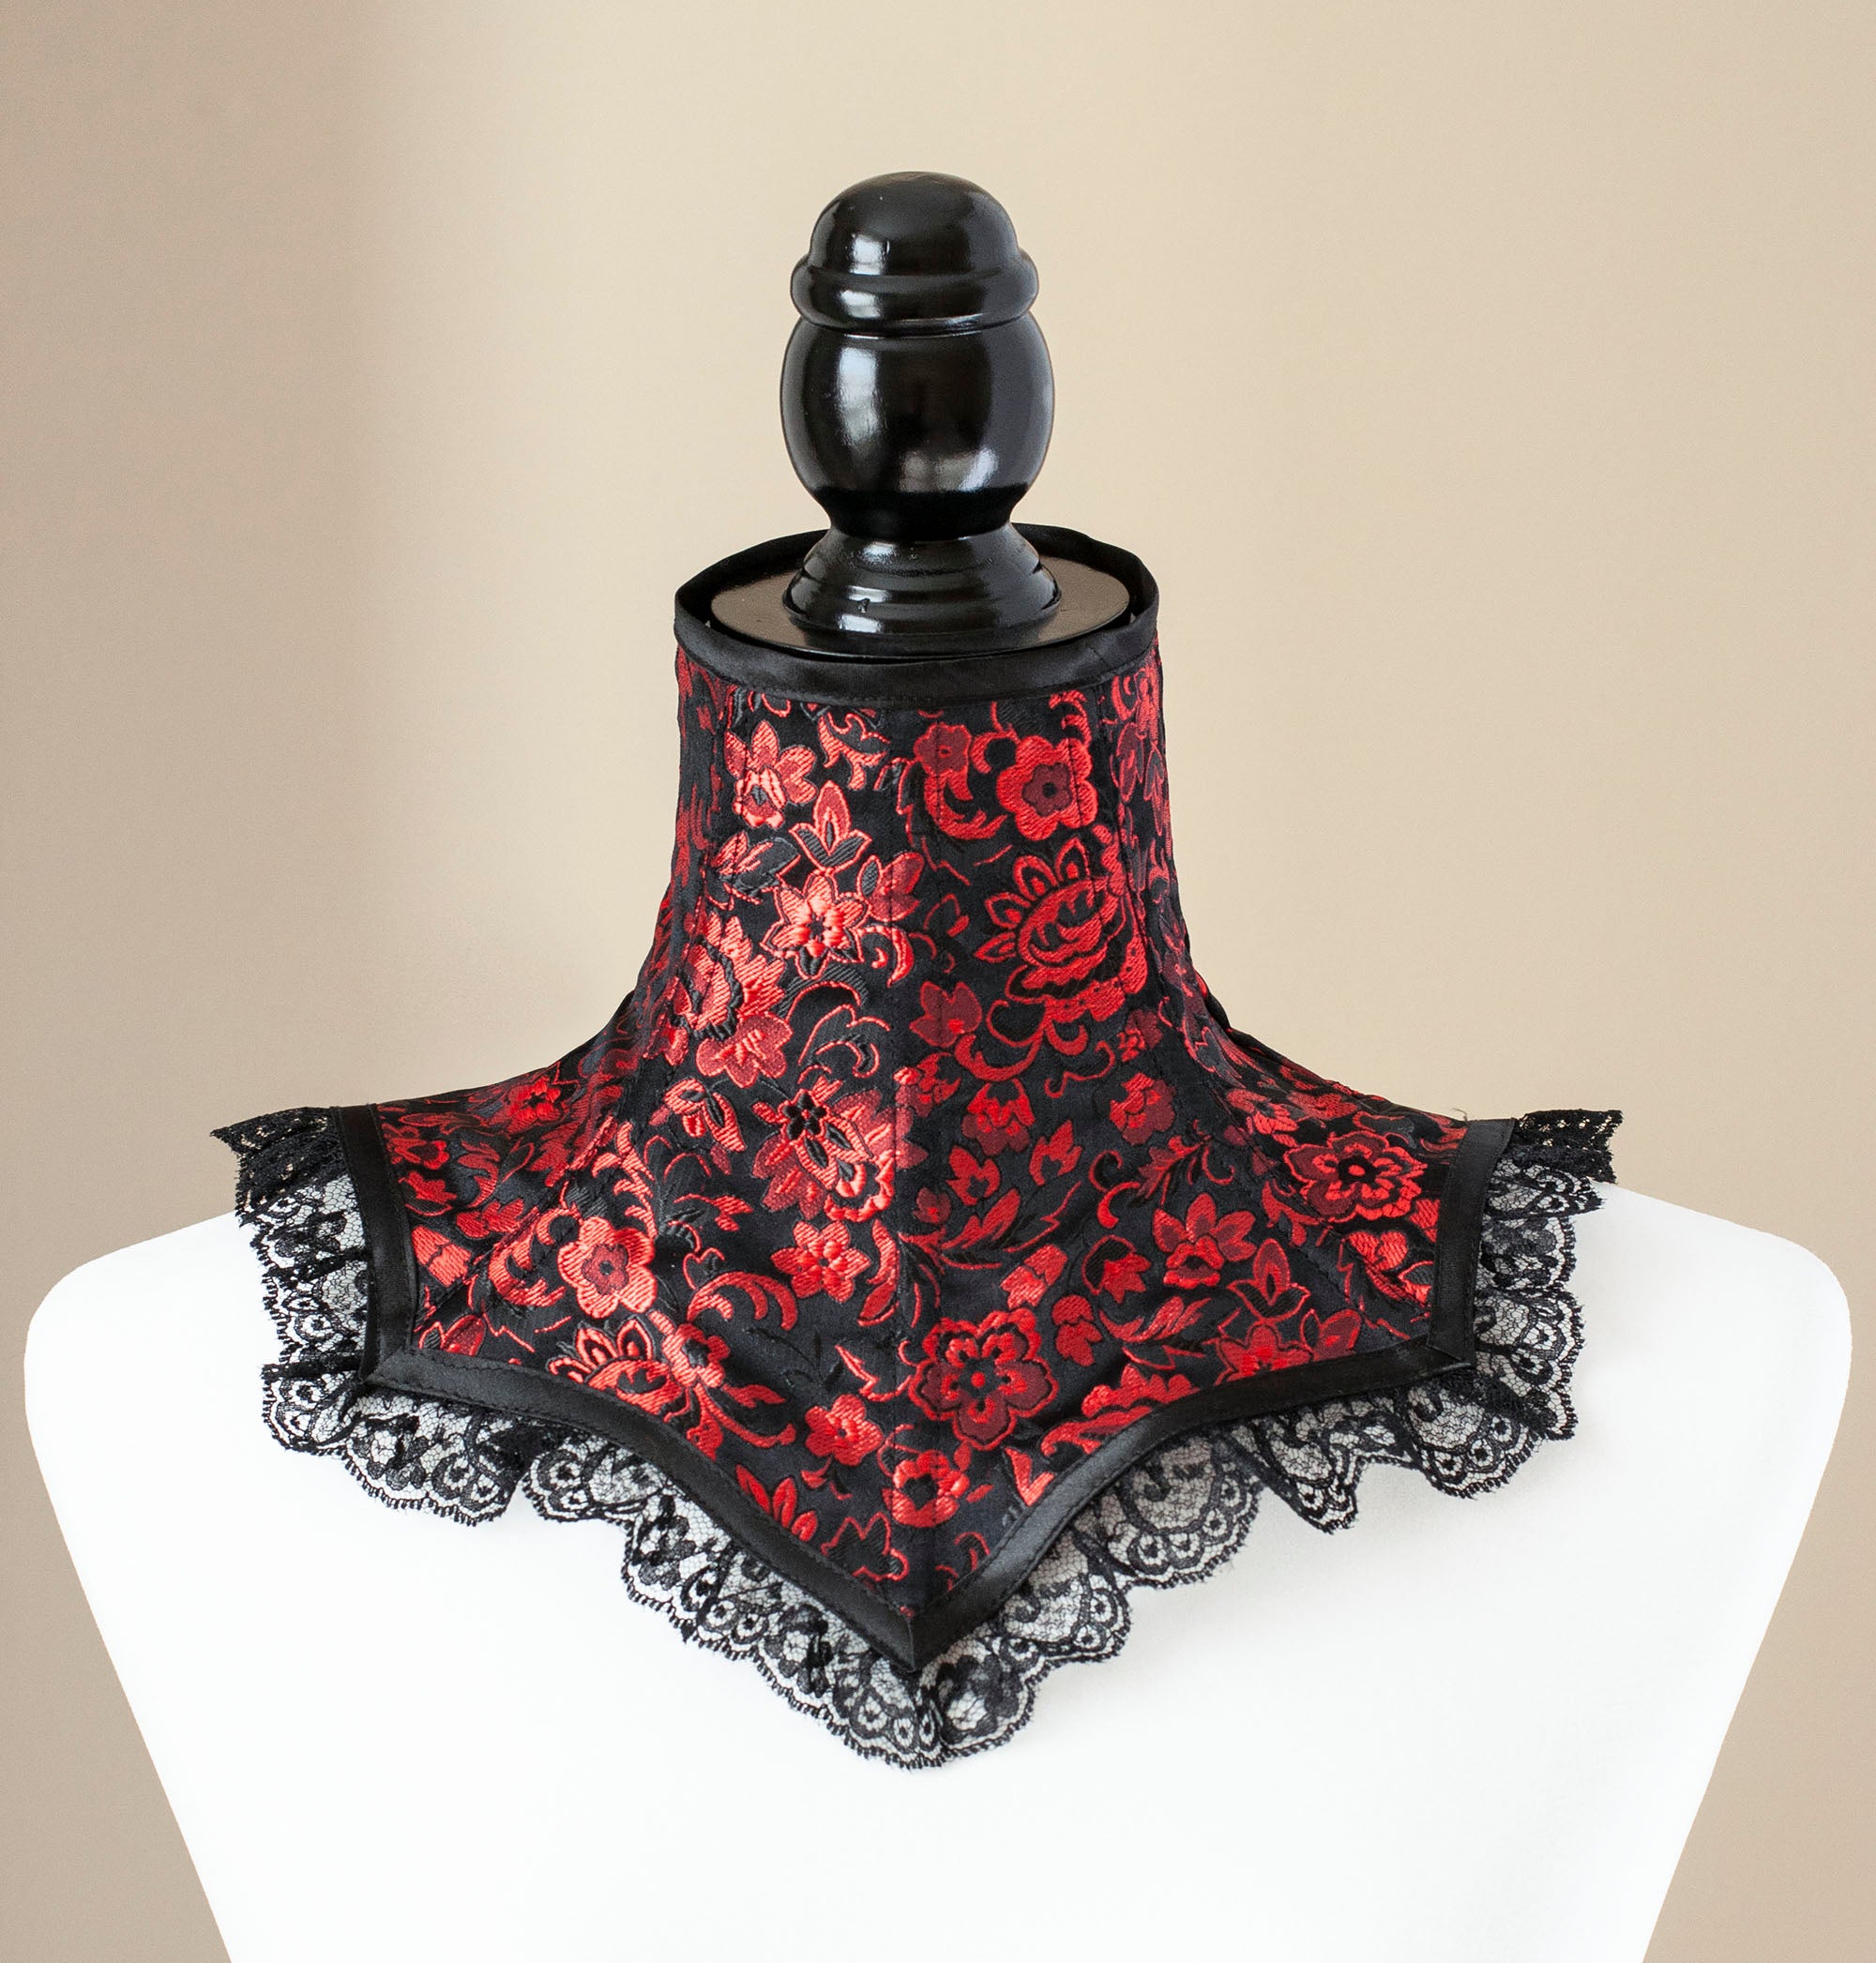 Red and Black Lace Corset 